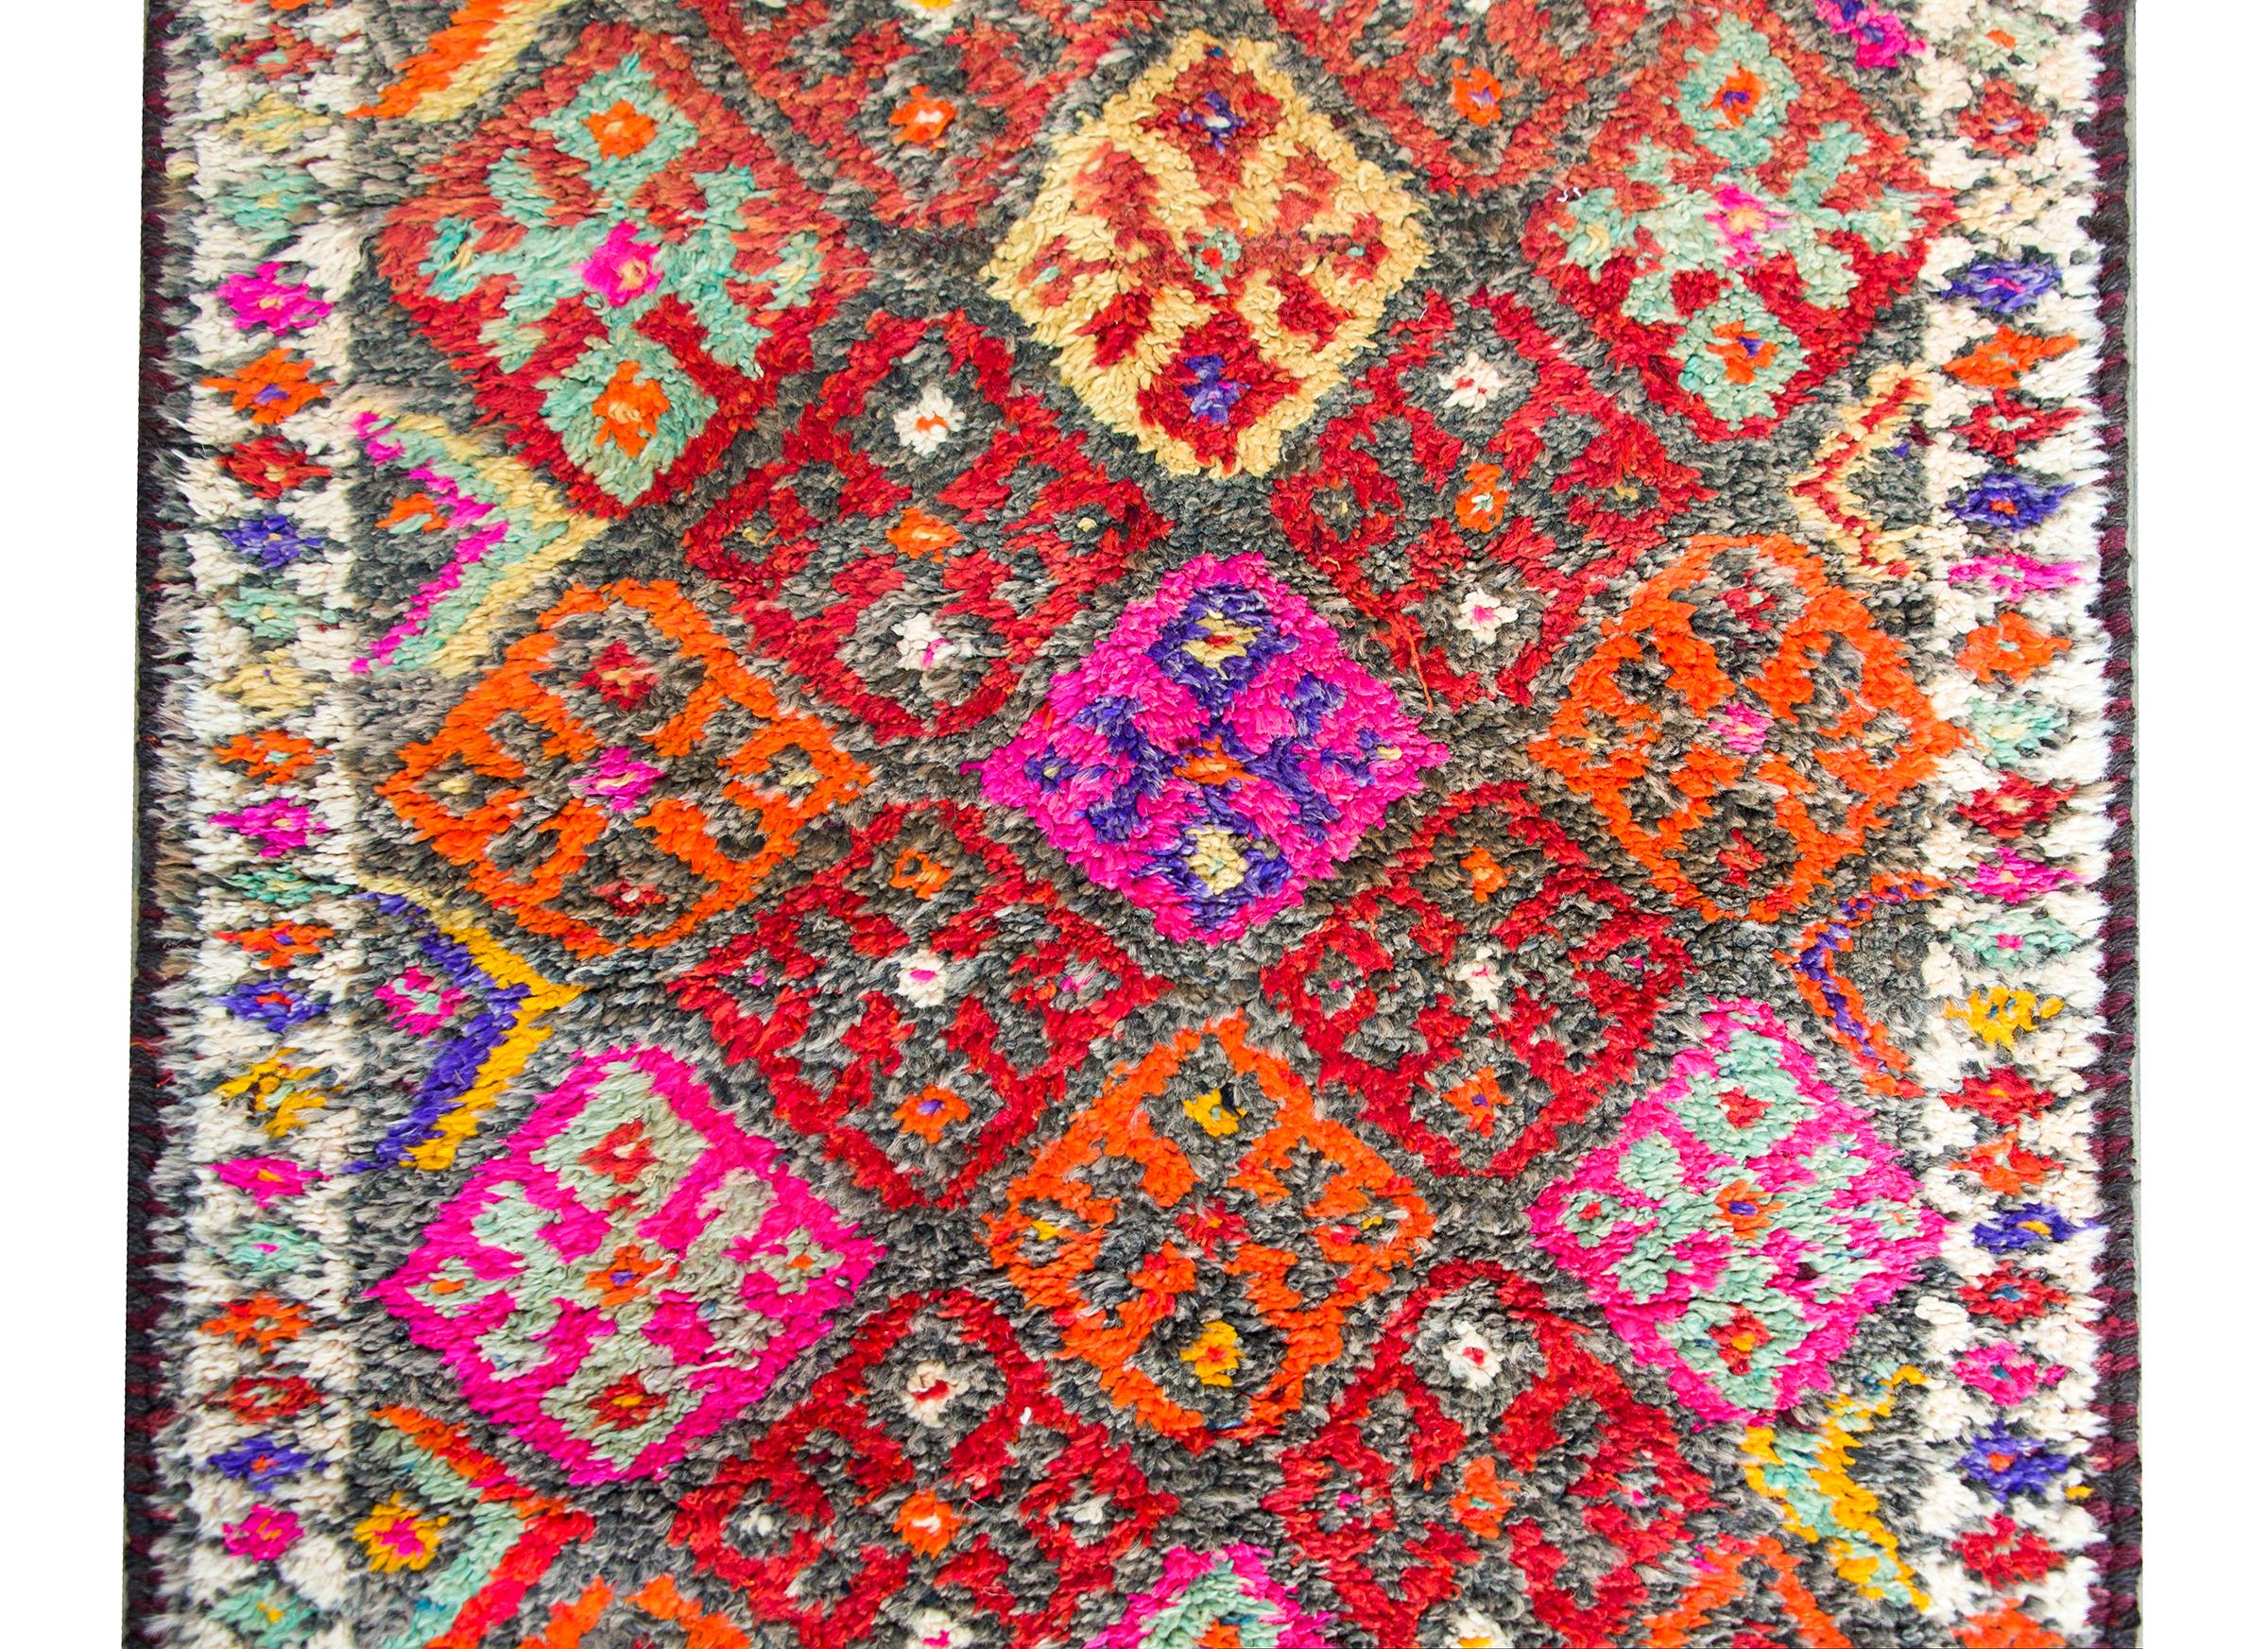 A striking late 20th century Turkish Anatolian kilim runner with an all-over repeated diamond pattern woven in brilliant oranges, pinks, violets, crimsons, and greens.